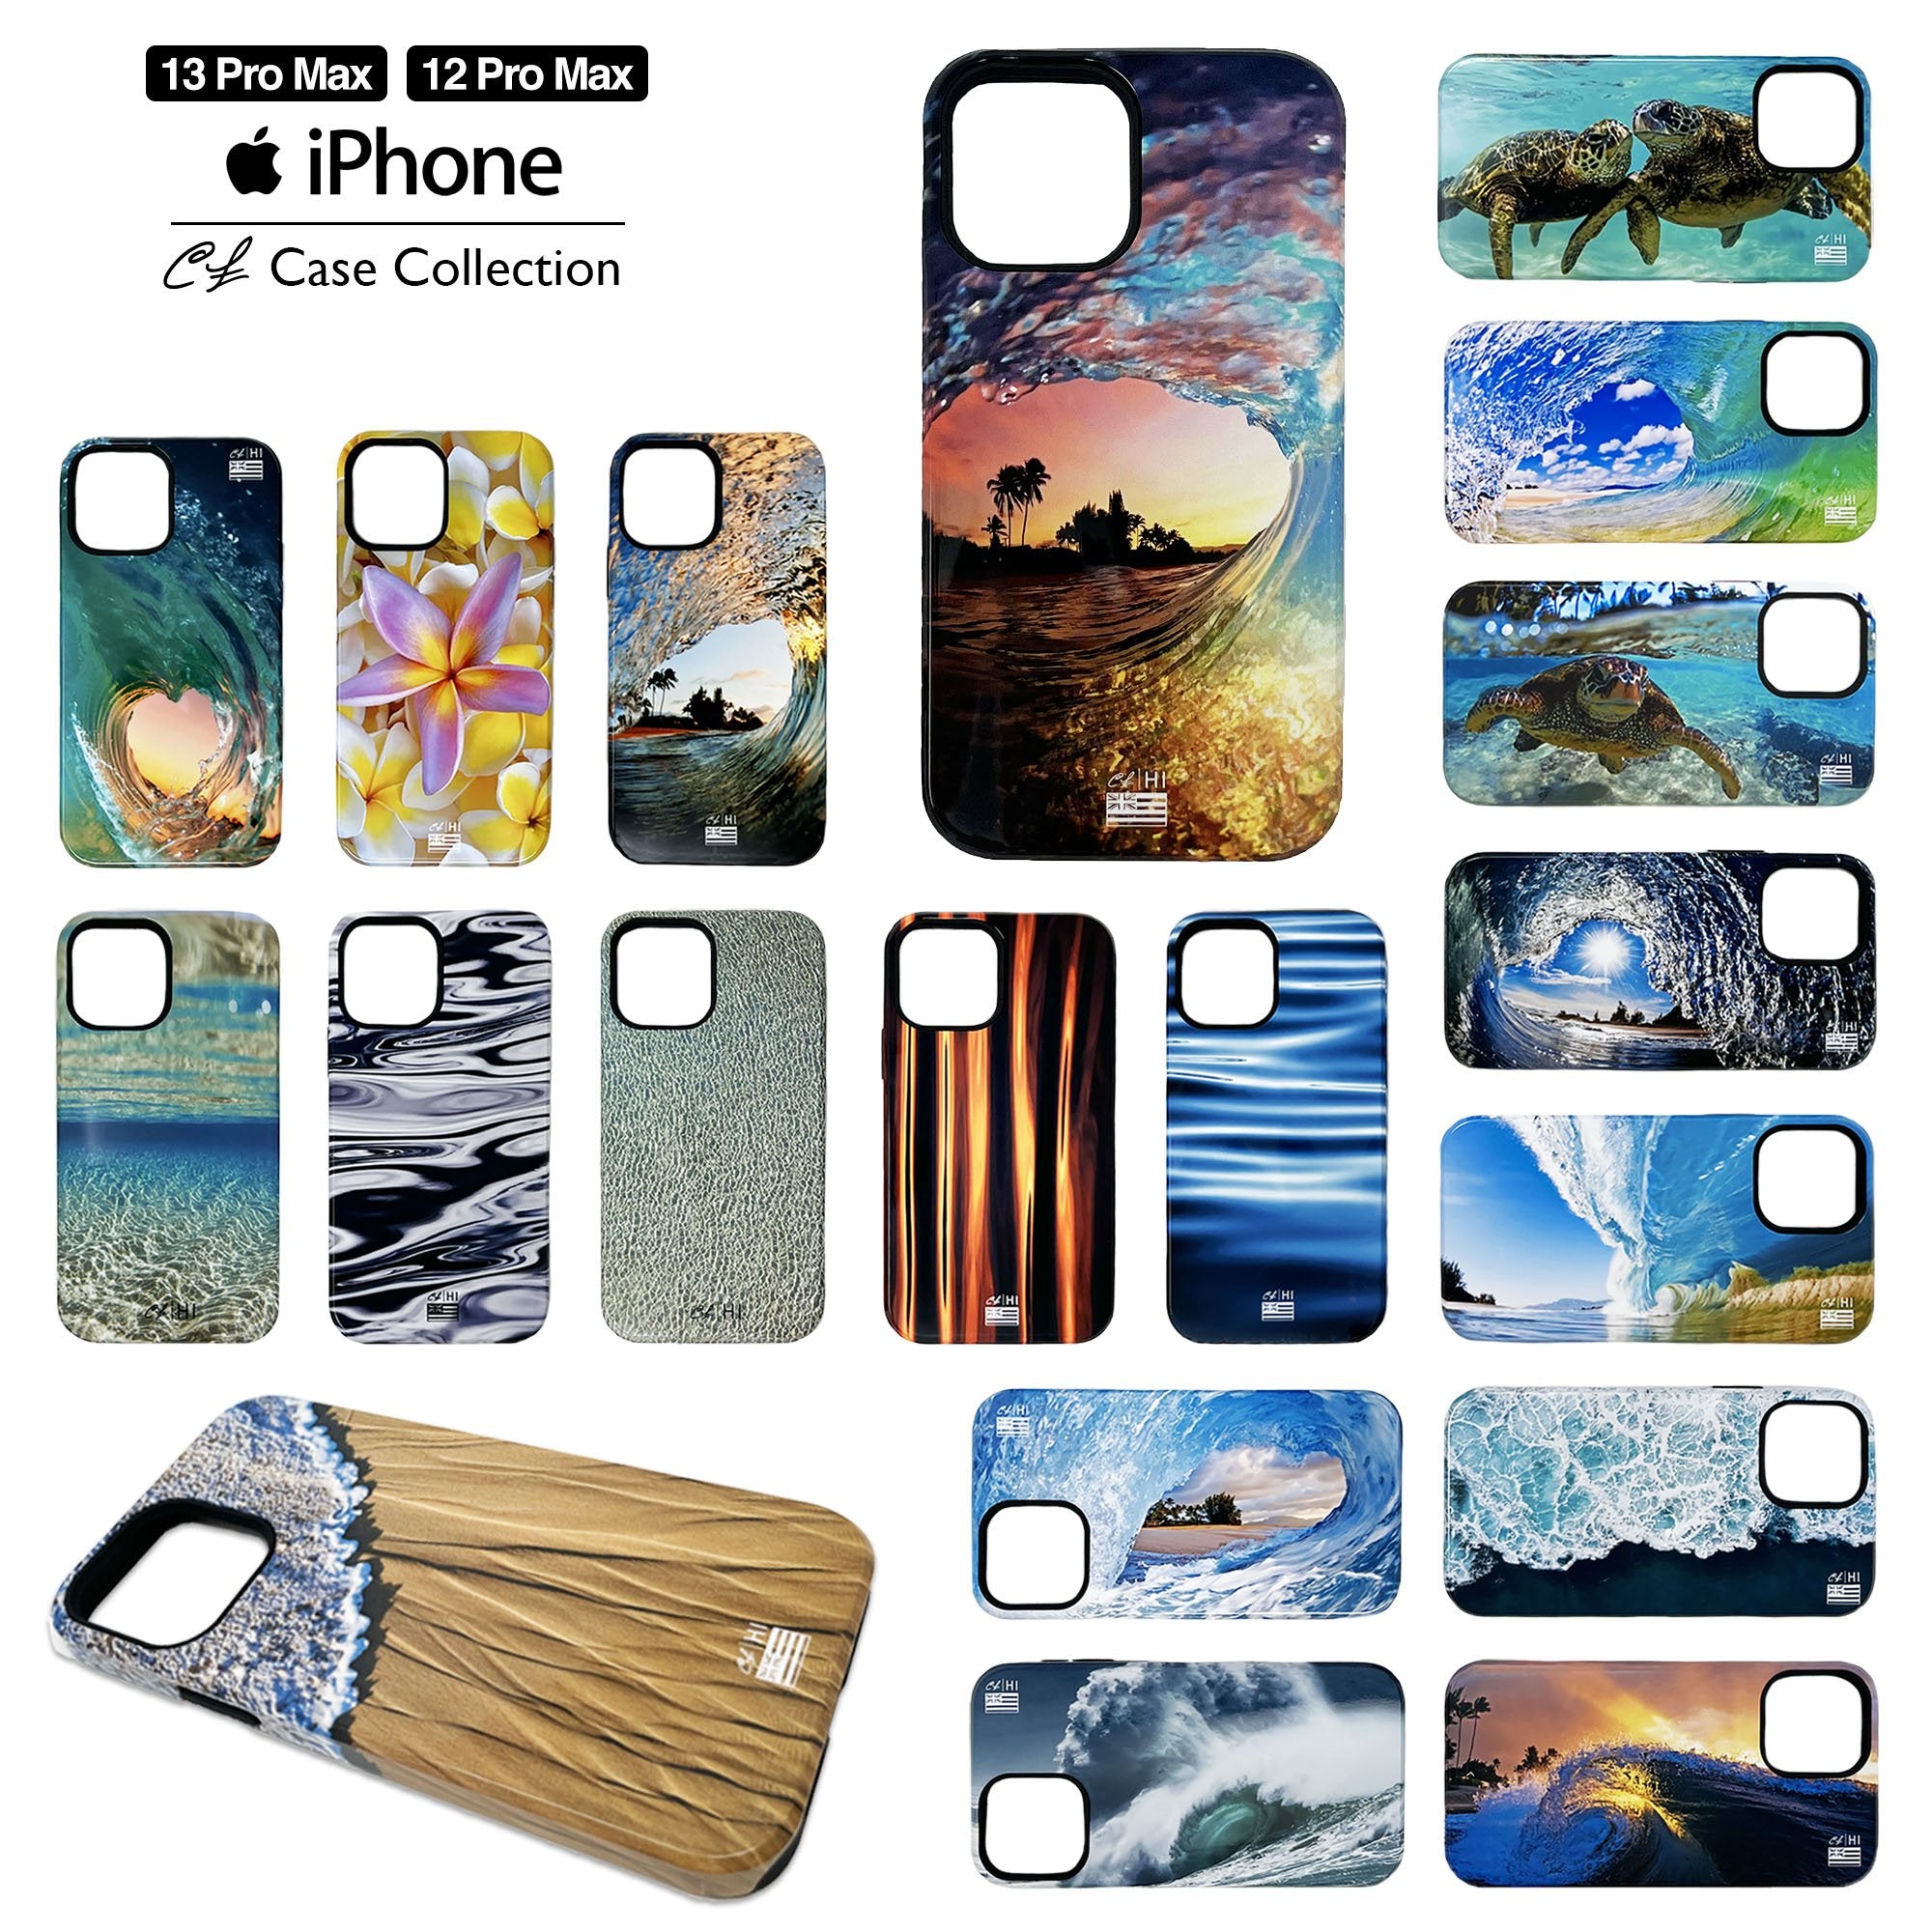 iPhone 13 & 12 Pro Max Case: Crystal Bay - Clark Little Photography